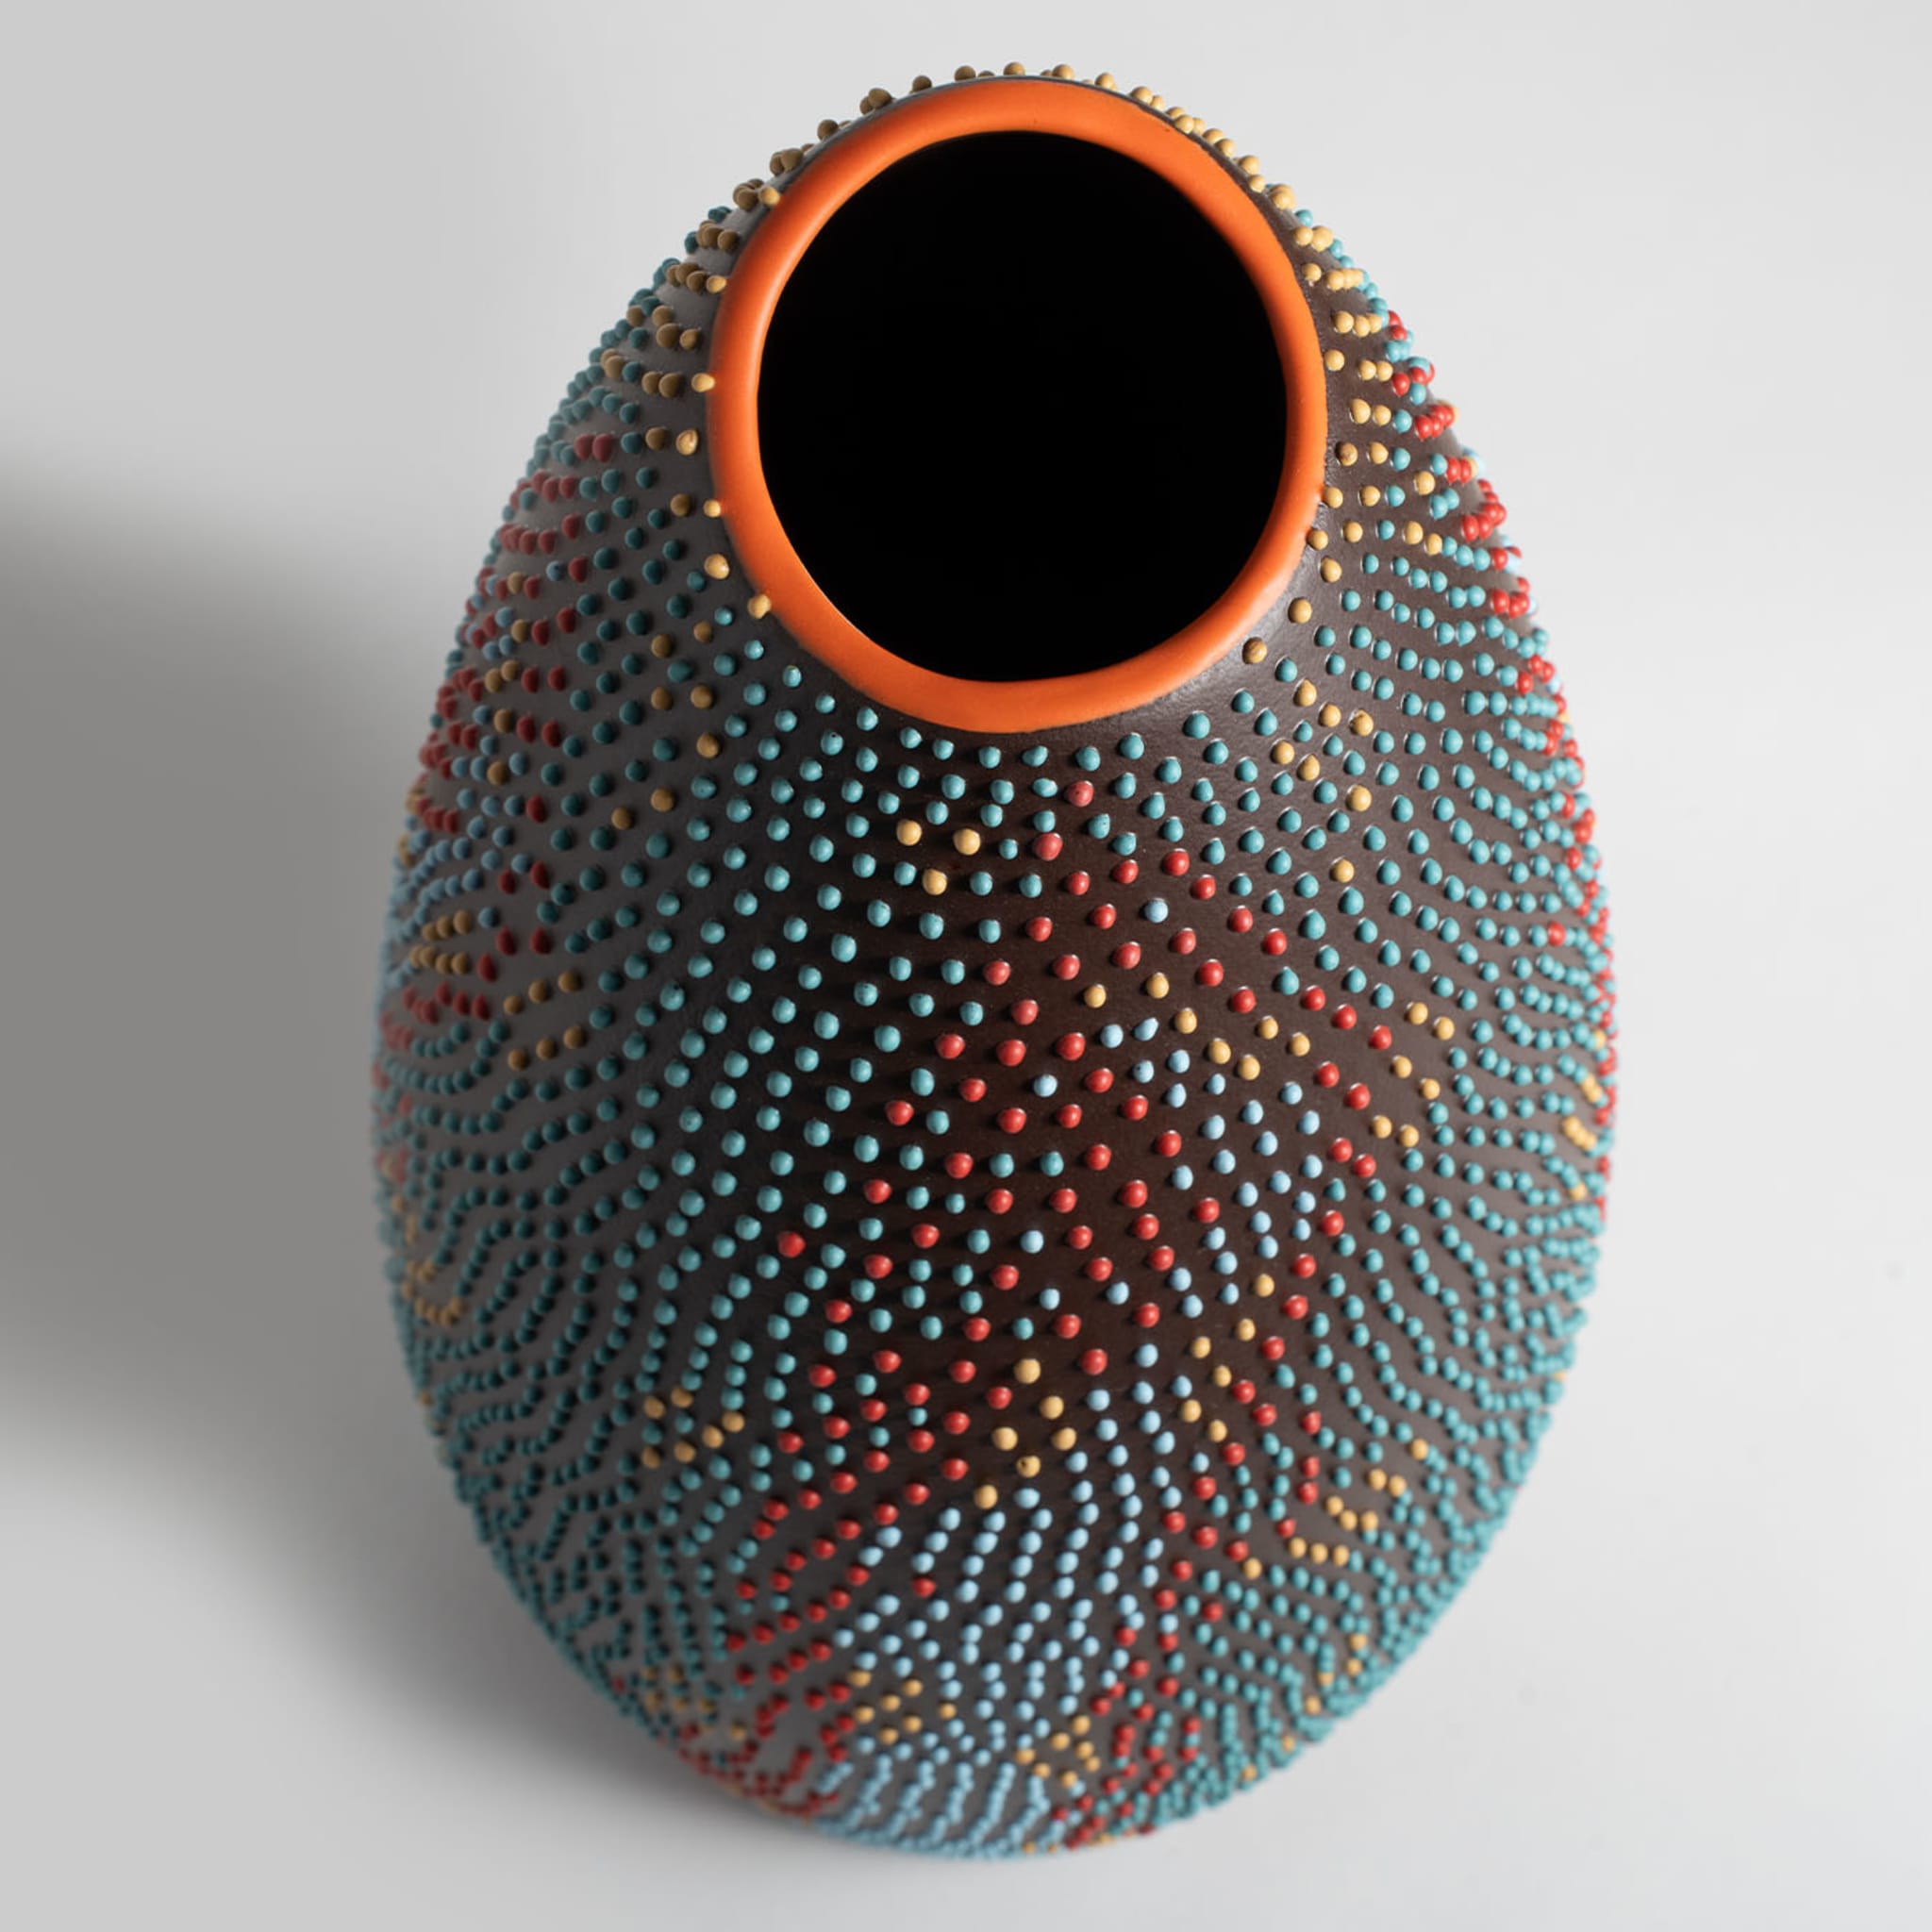 RIC-4 Chameleon Polychrome Vase by A. Mancuso/Analogia Projects - Alternative view 3